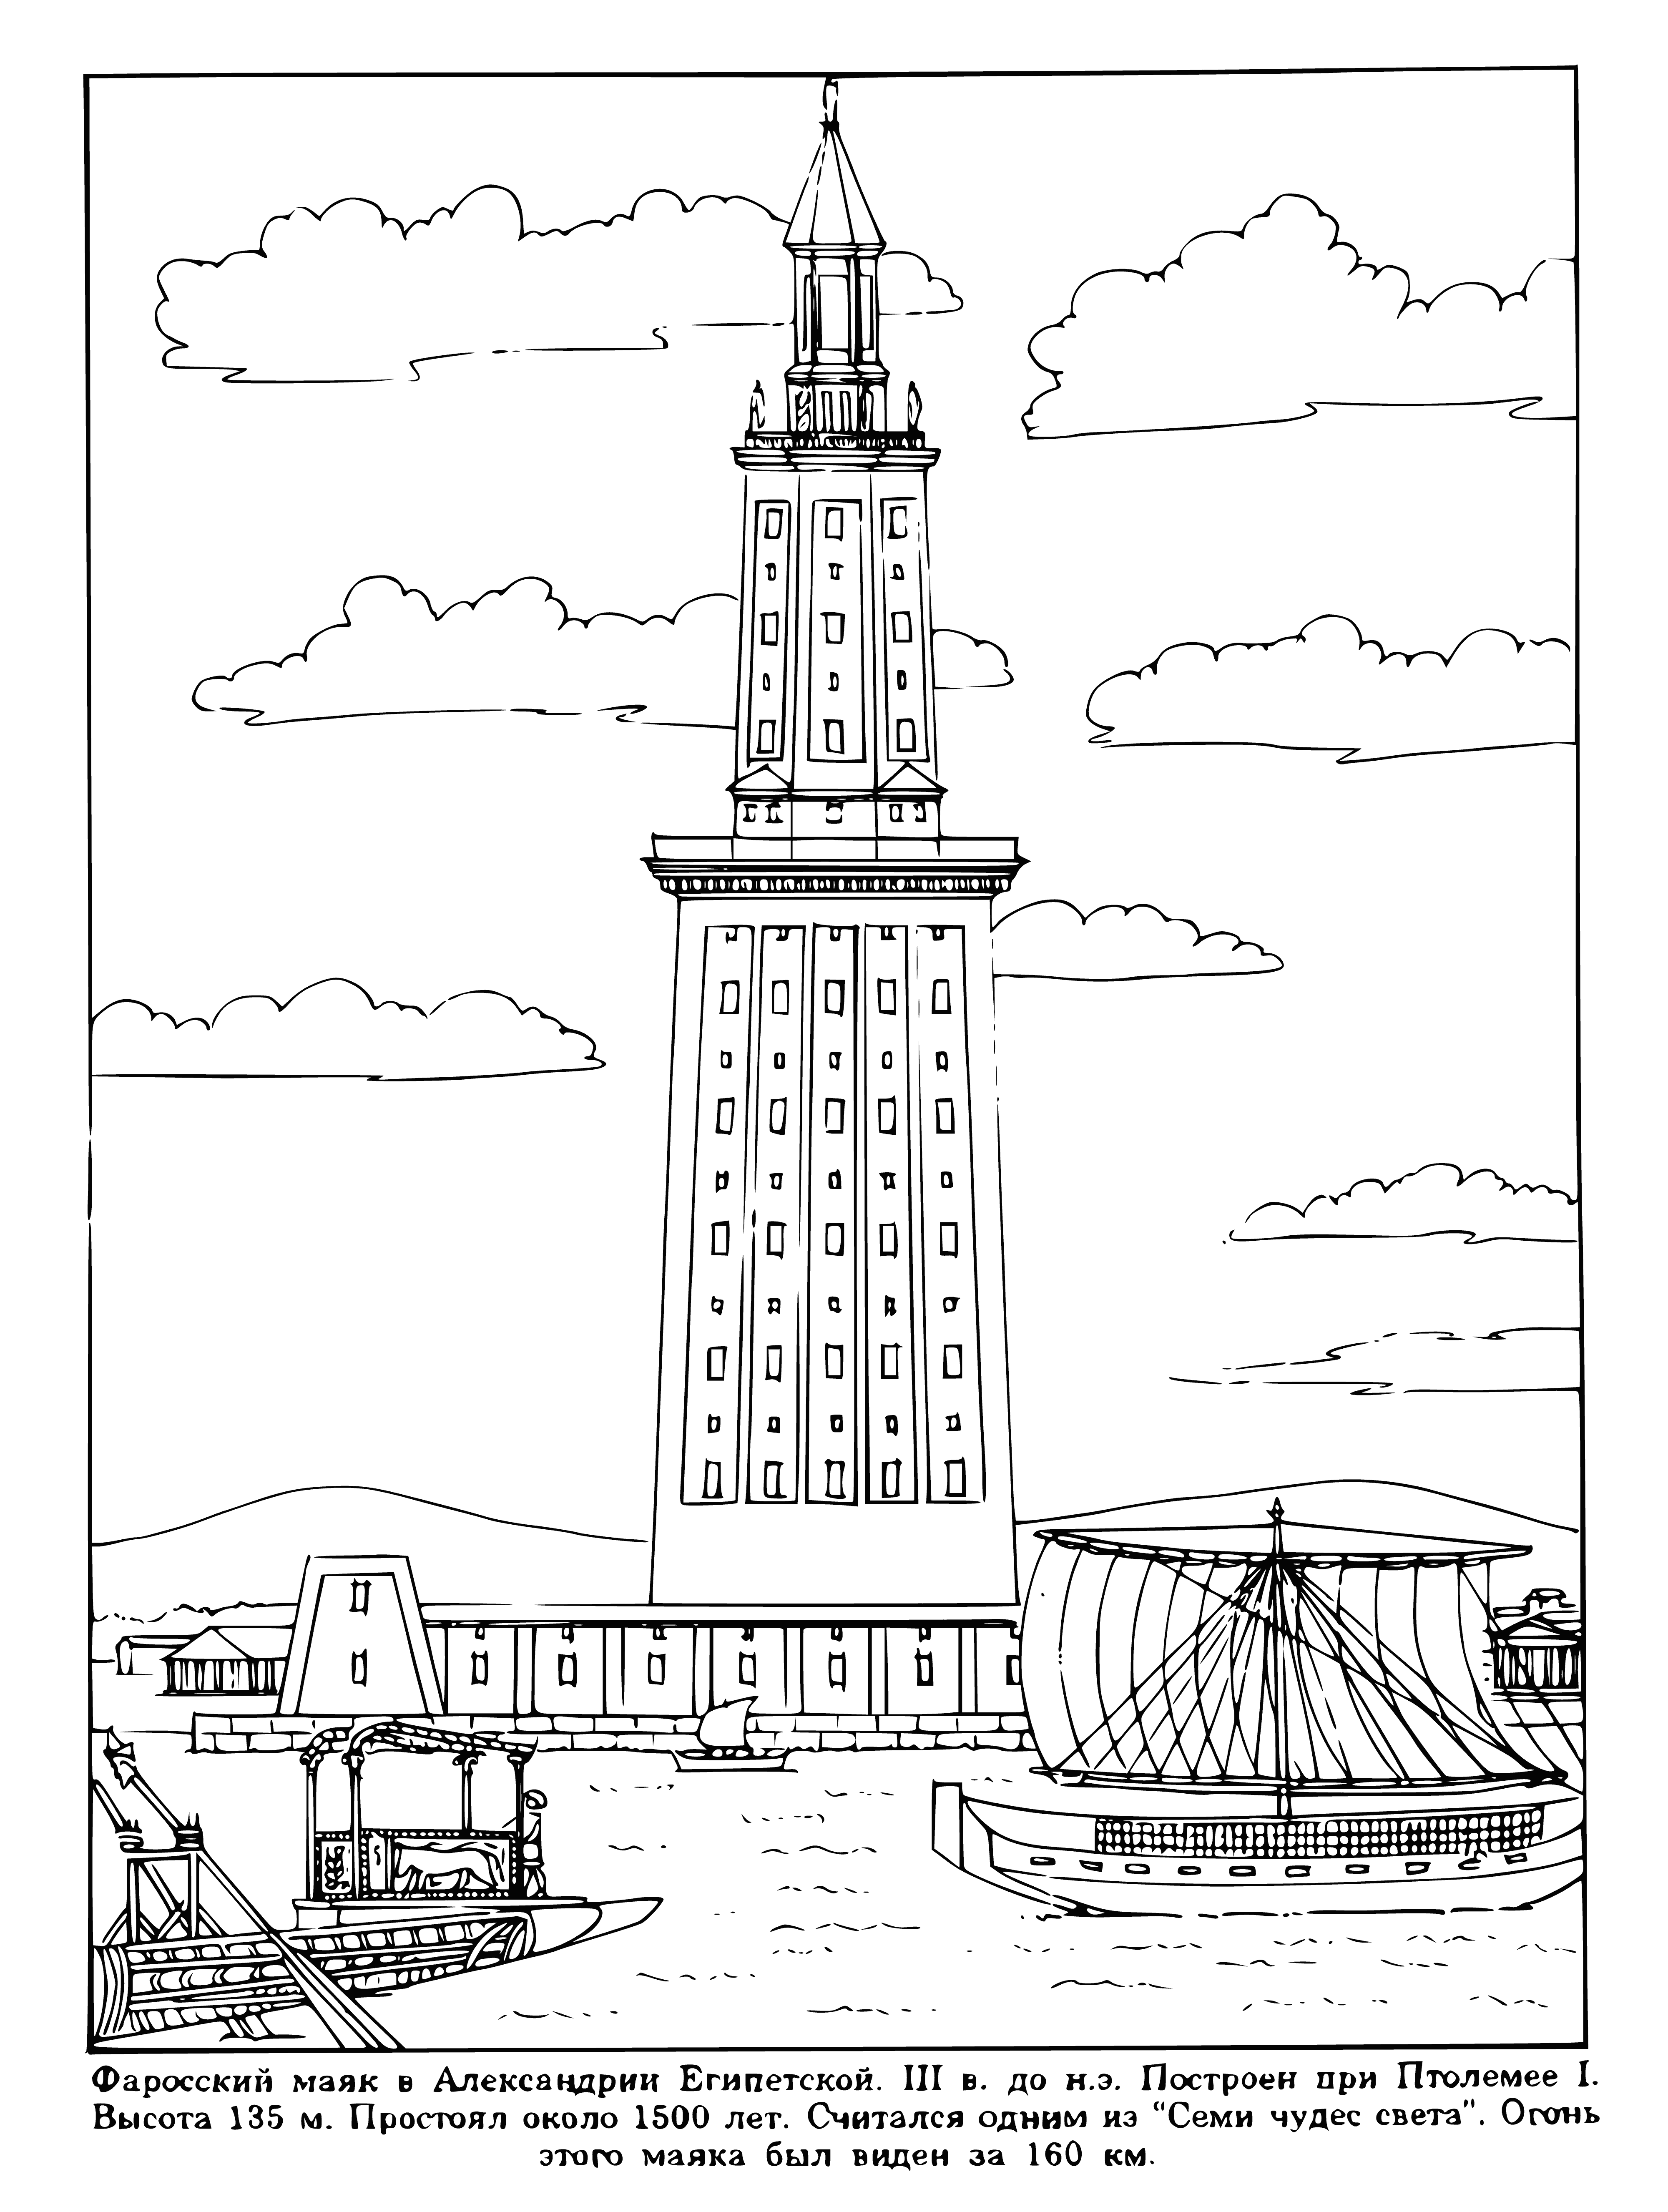 coloring page: Alexandrian lighthouse, one of seven WOW, is made of white stone, several stories high w/ conical roof & windows. Large door at base.